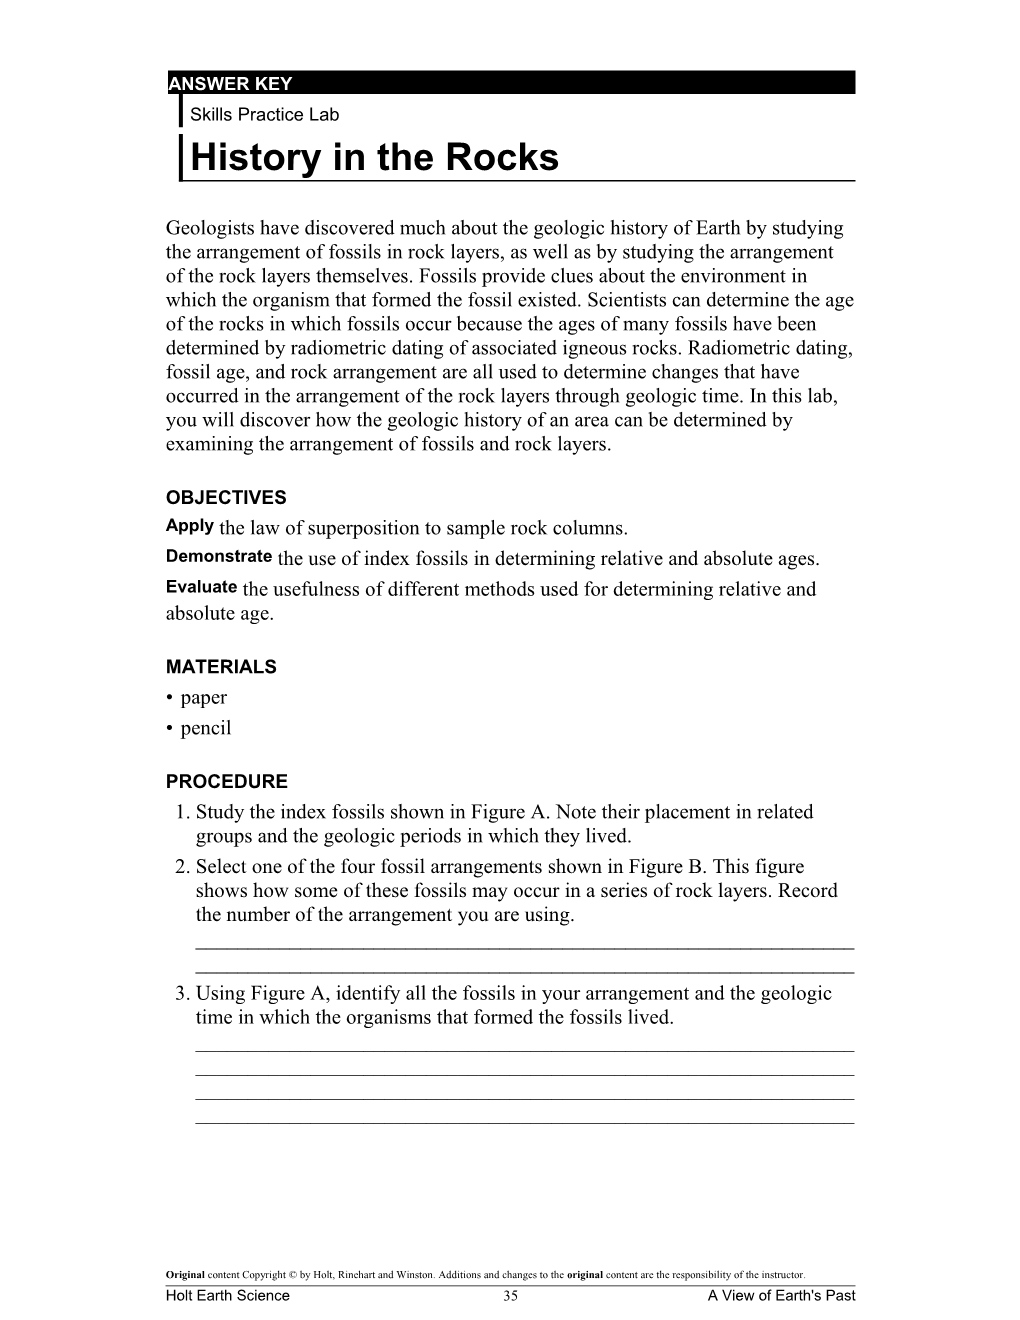 History in the Rocks